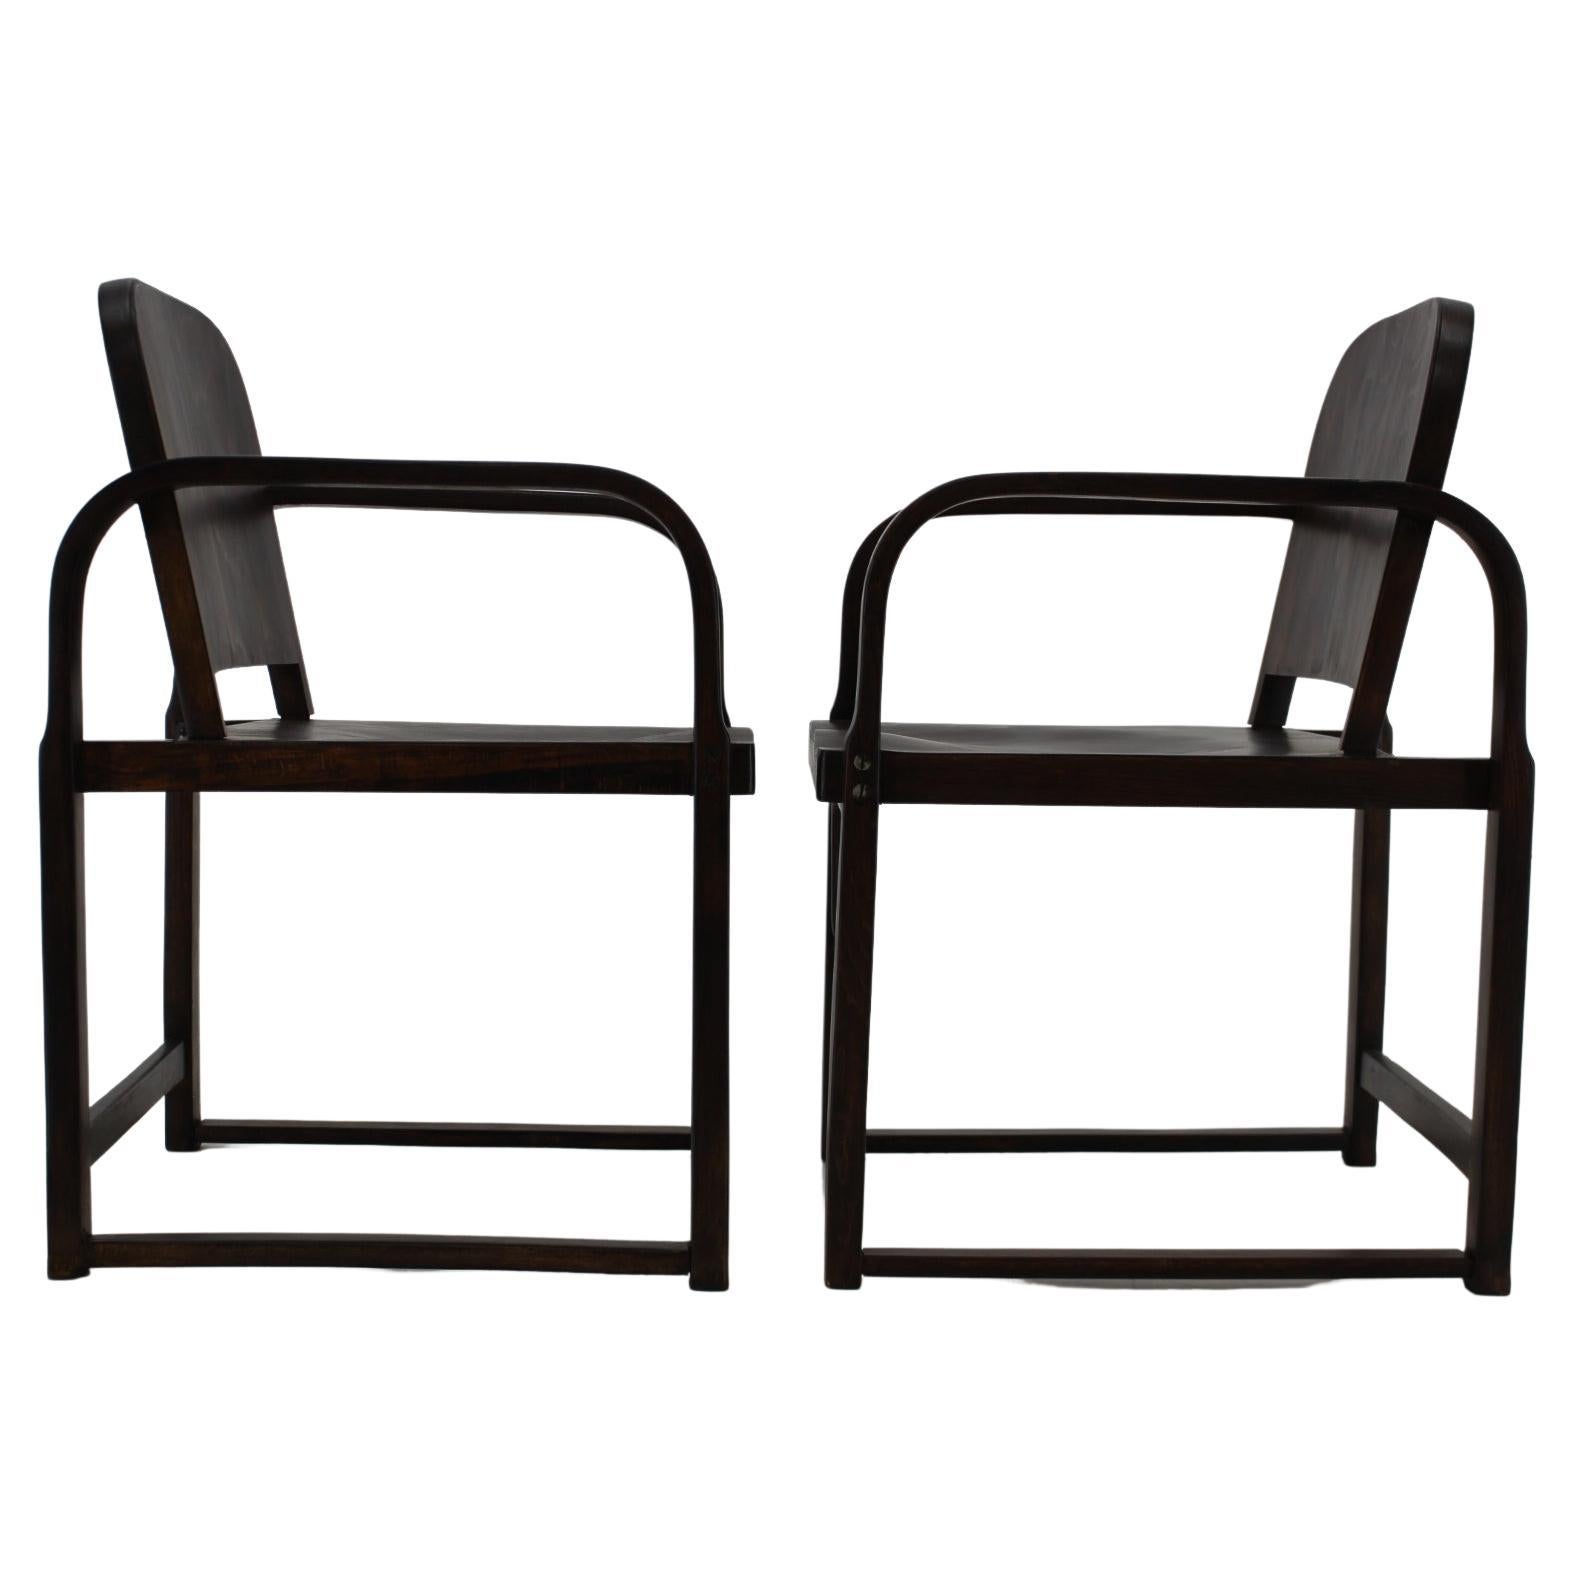 1930s Pair of Thonet Bentwood Armchairs A745 by Tatra, Czechoslovakia